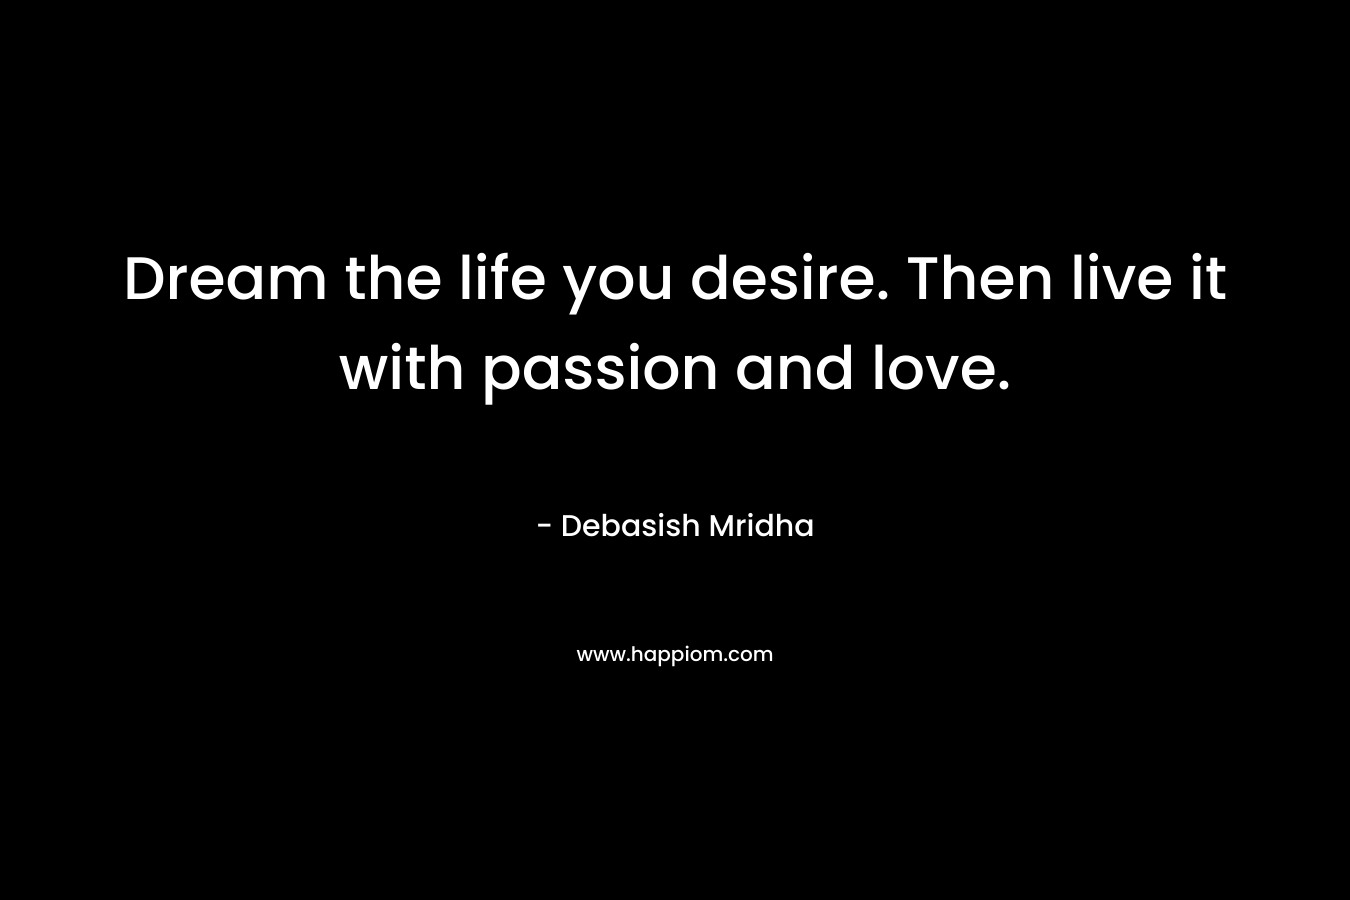 Dream the life you desire. Then live it with passion and love.